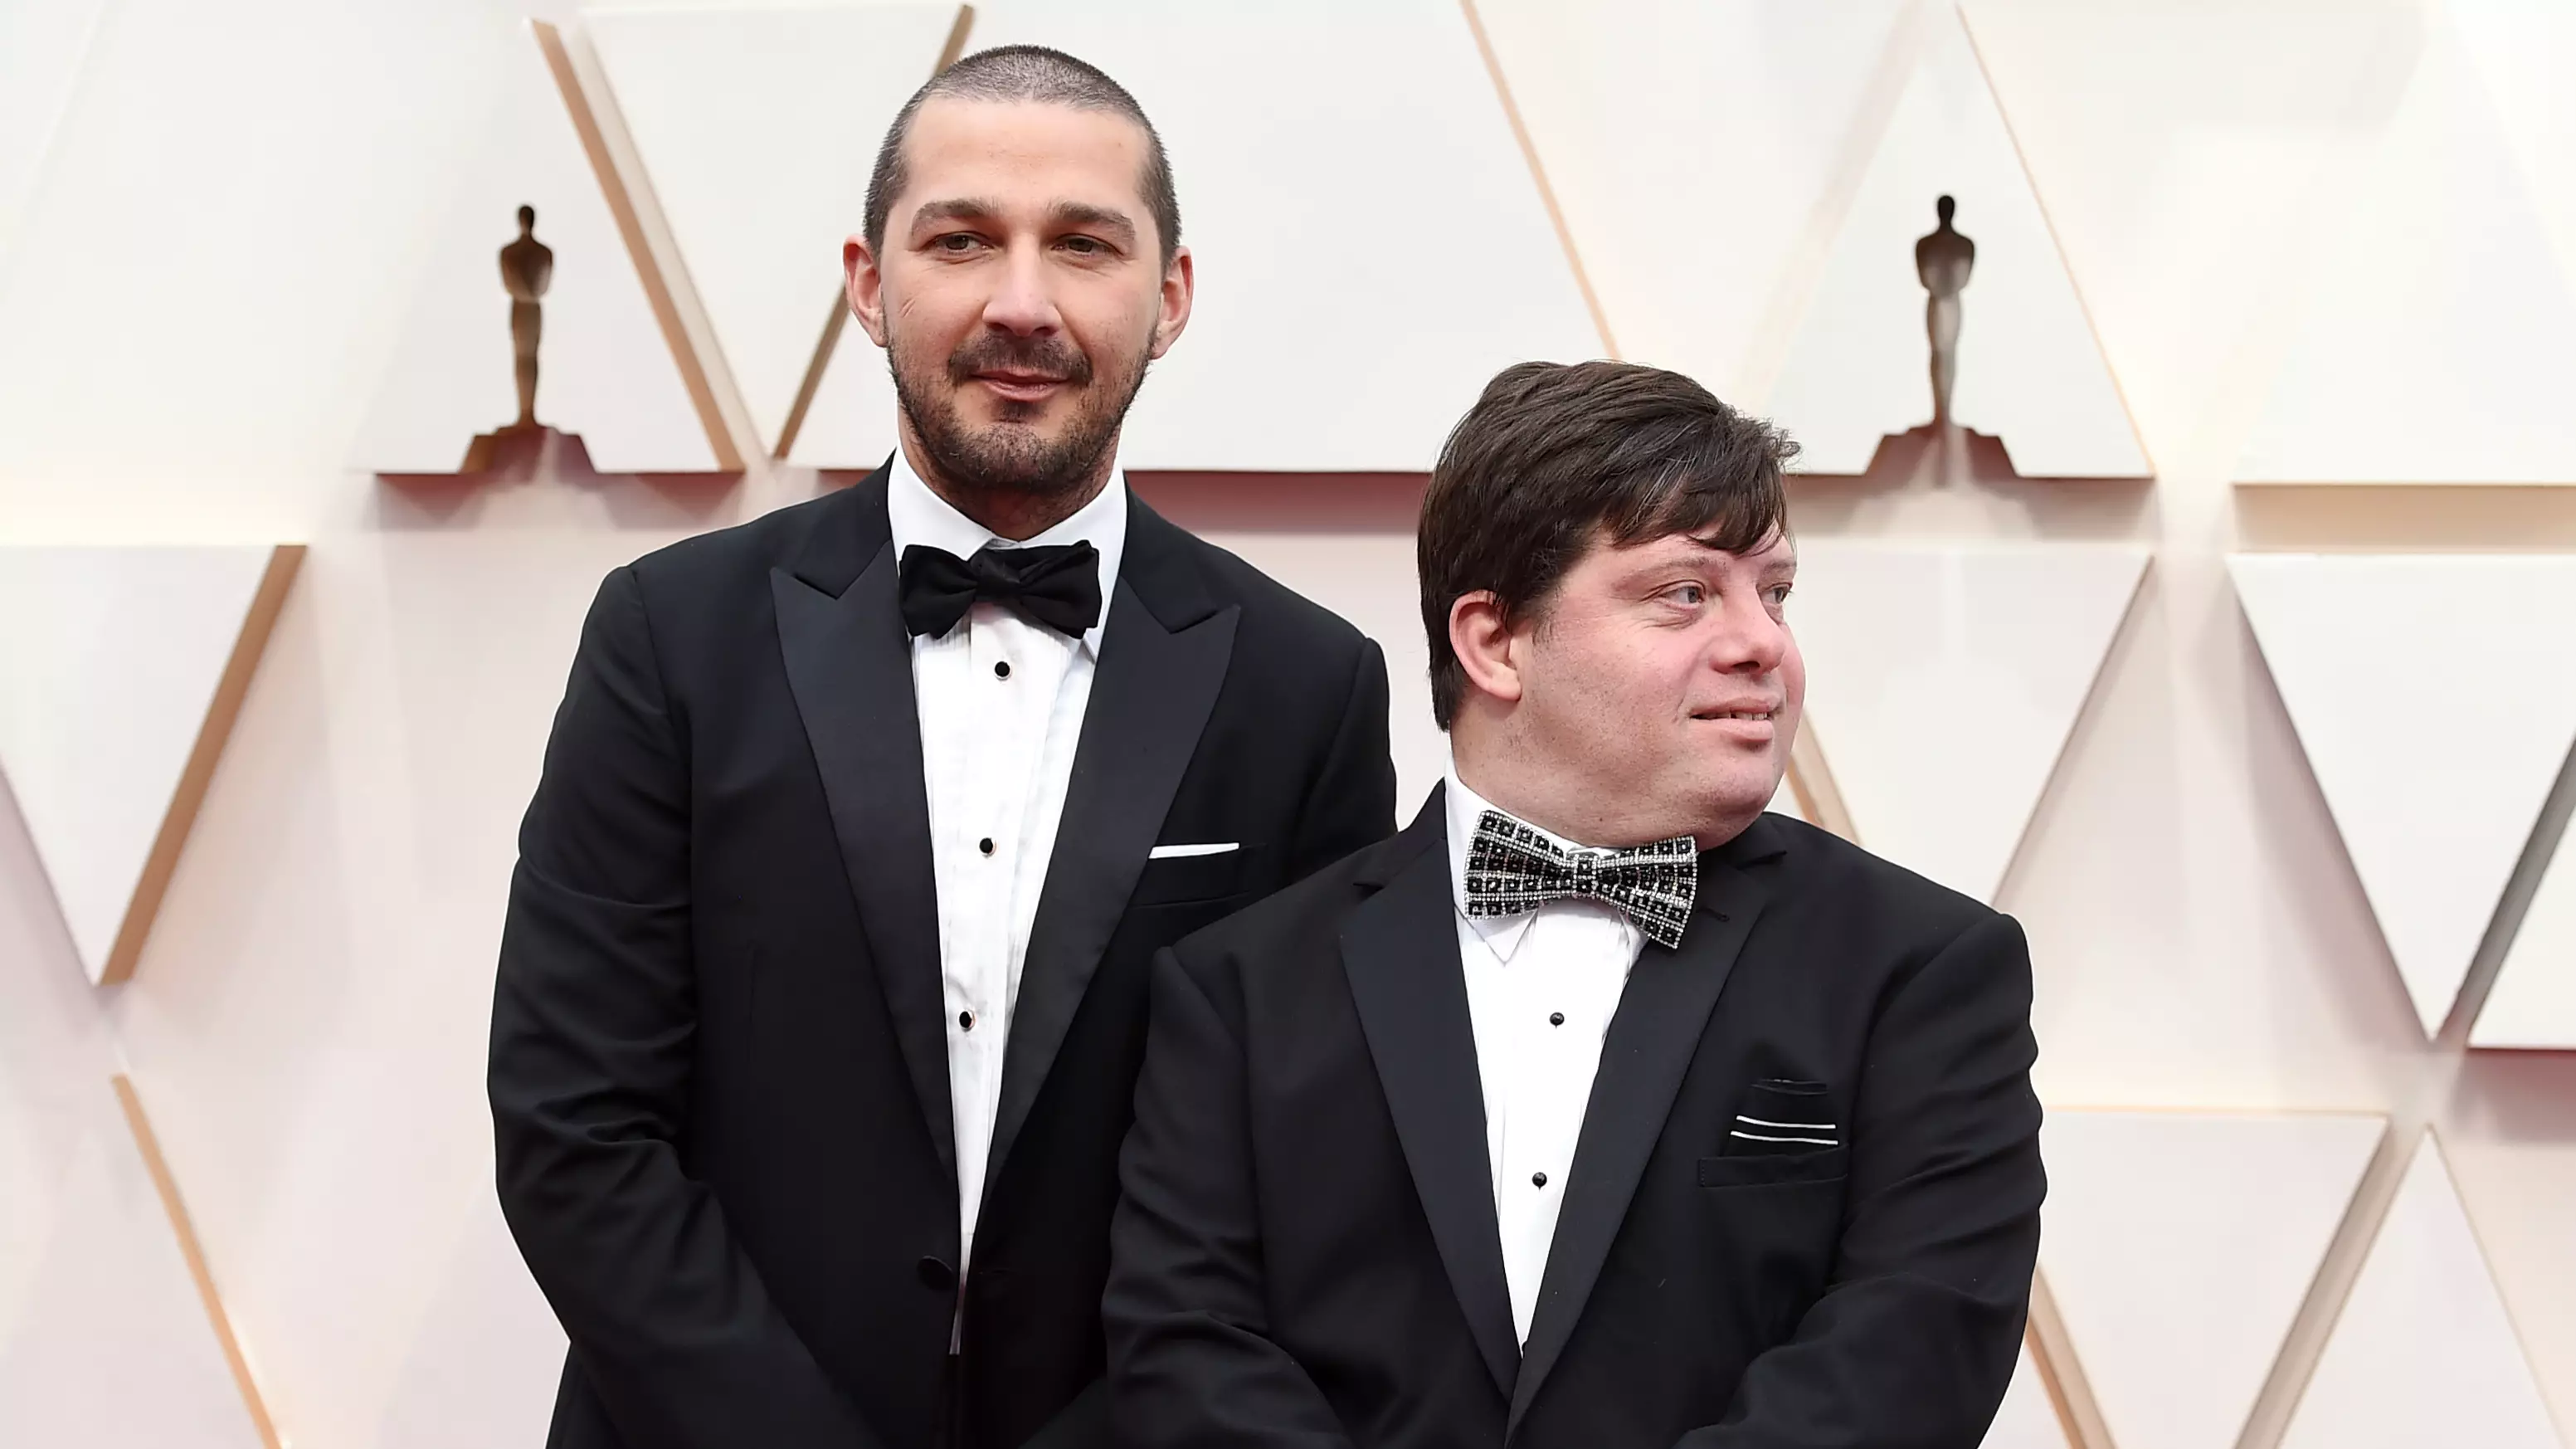 The Sweet Story Behind Shia LaBeouf’s Oscars Date